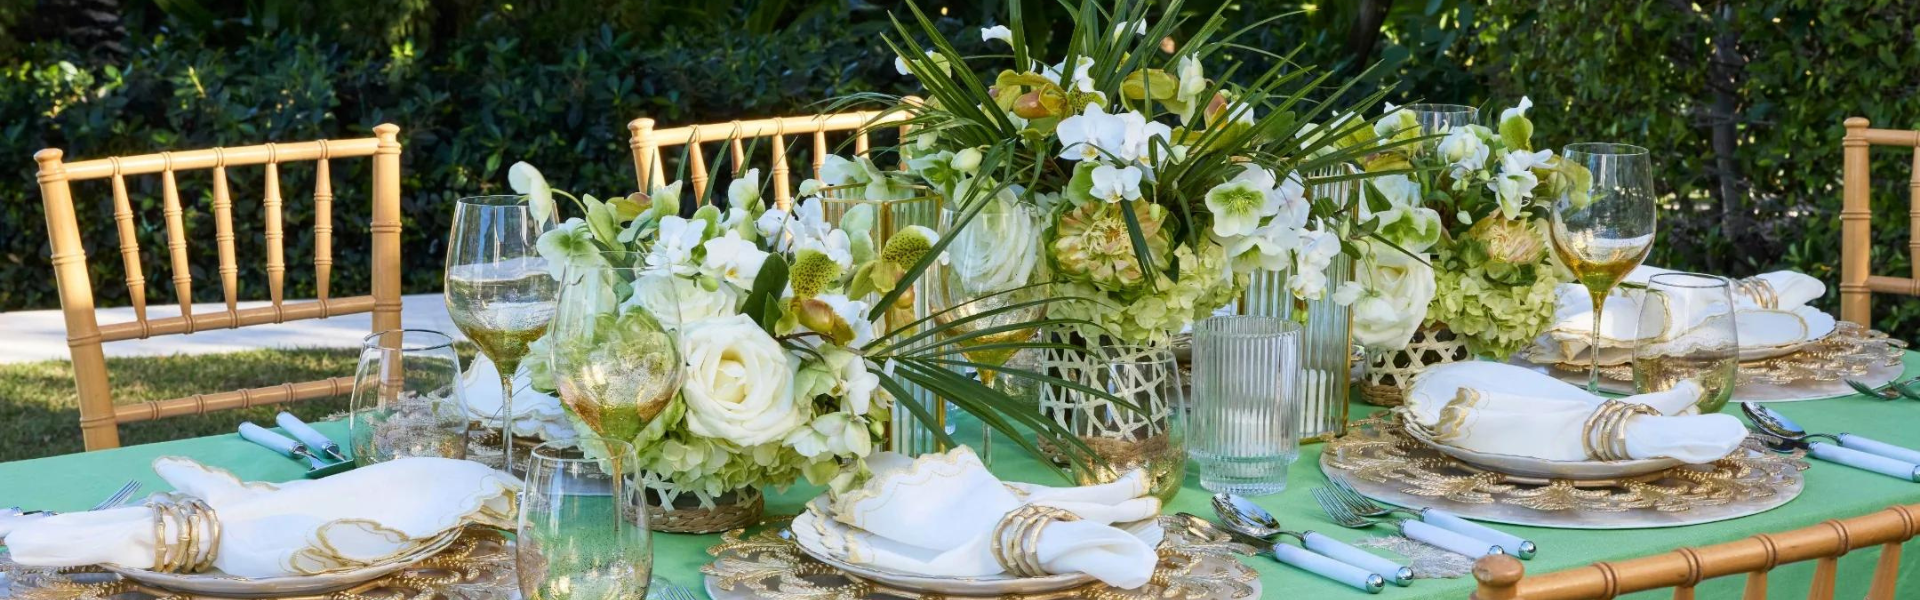 Table Linens & Accents